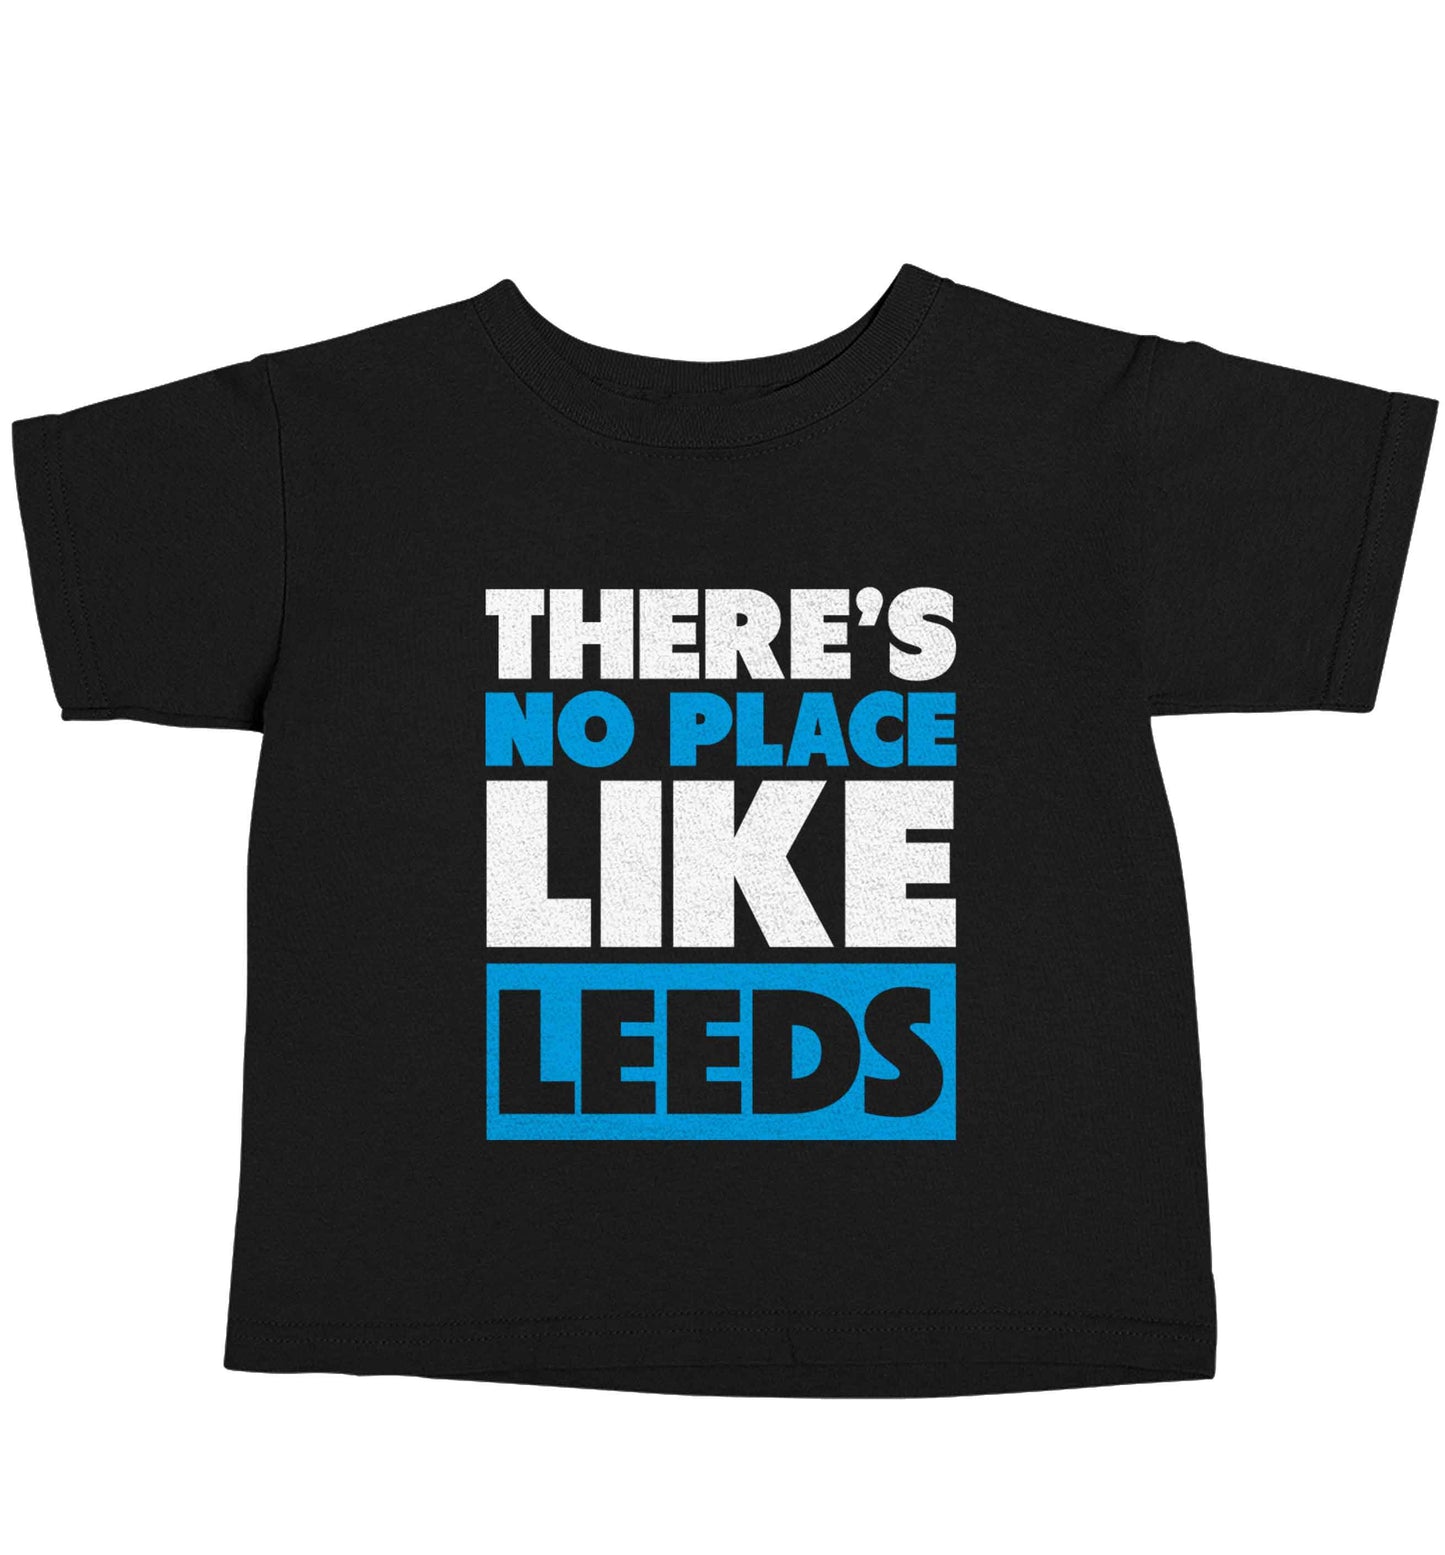 There's no place like Leeds Black baby toddler Tshirt 2 years